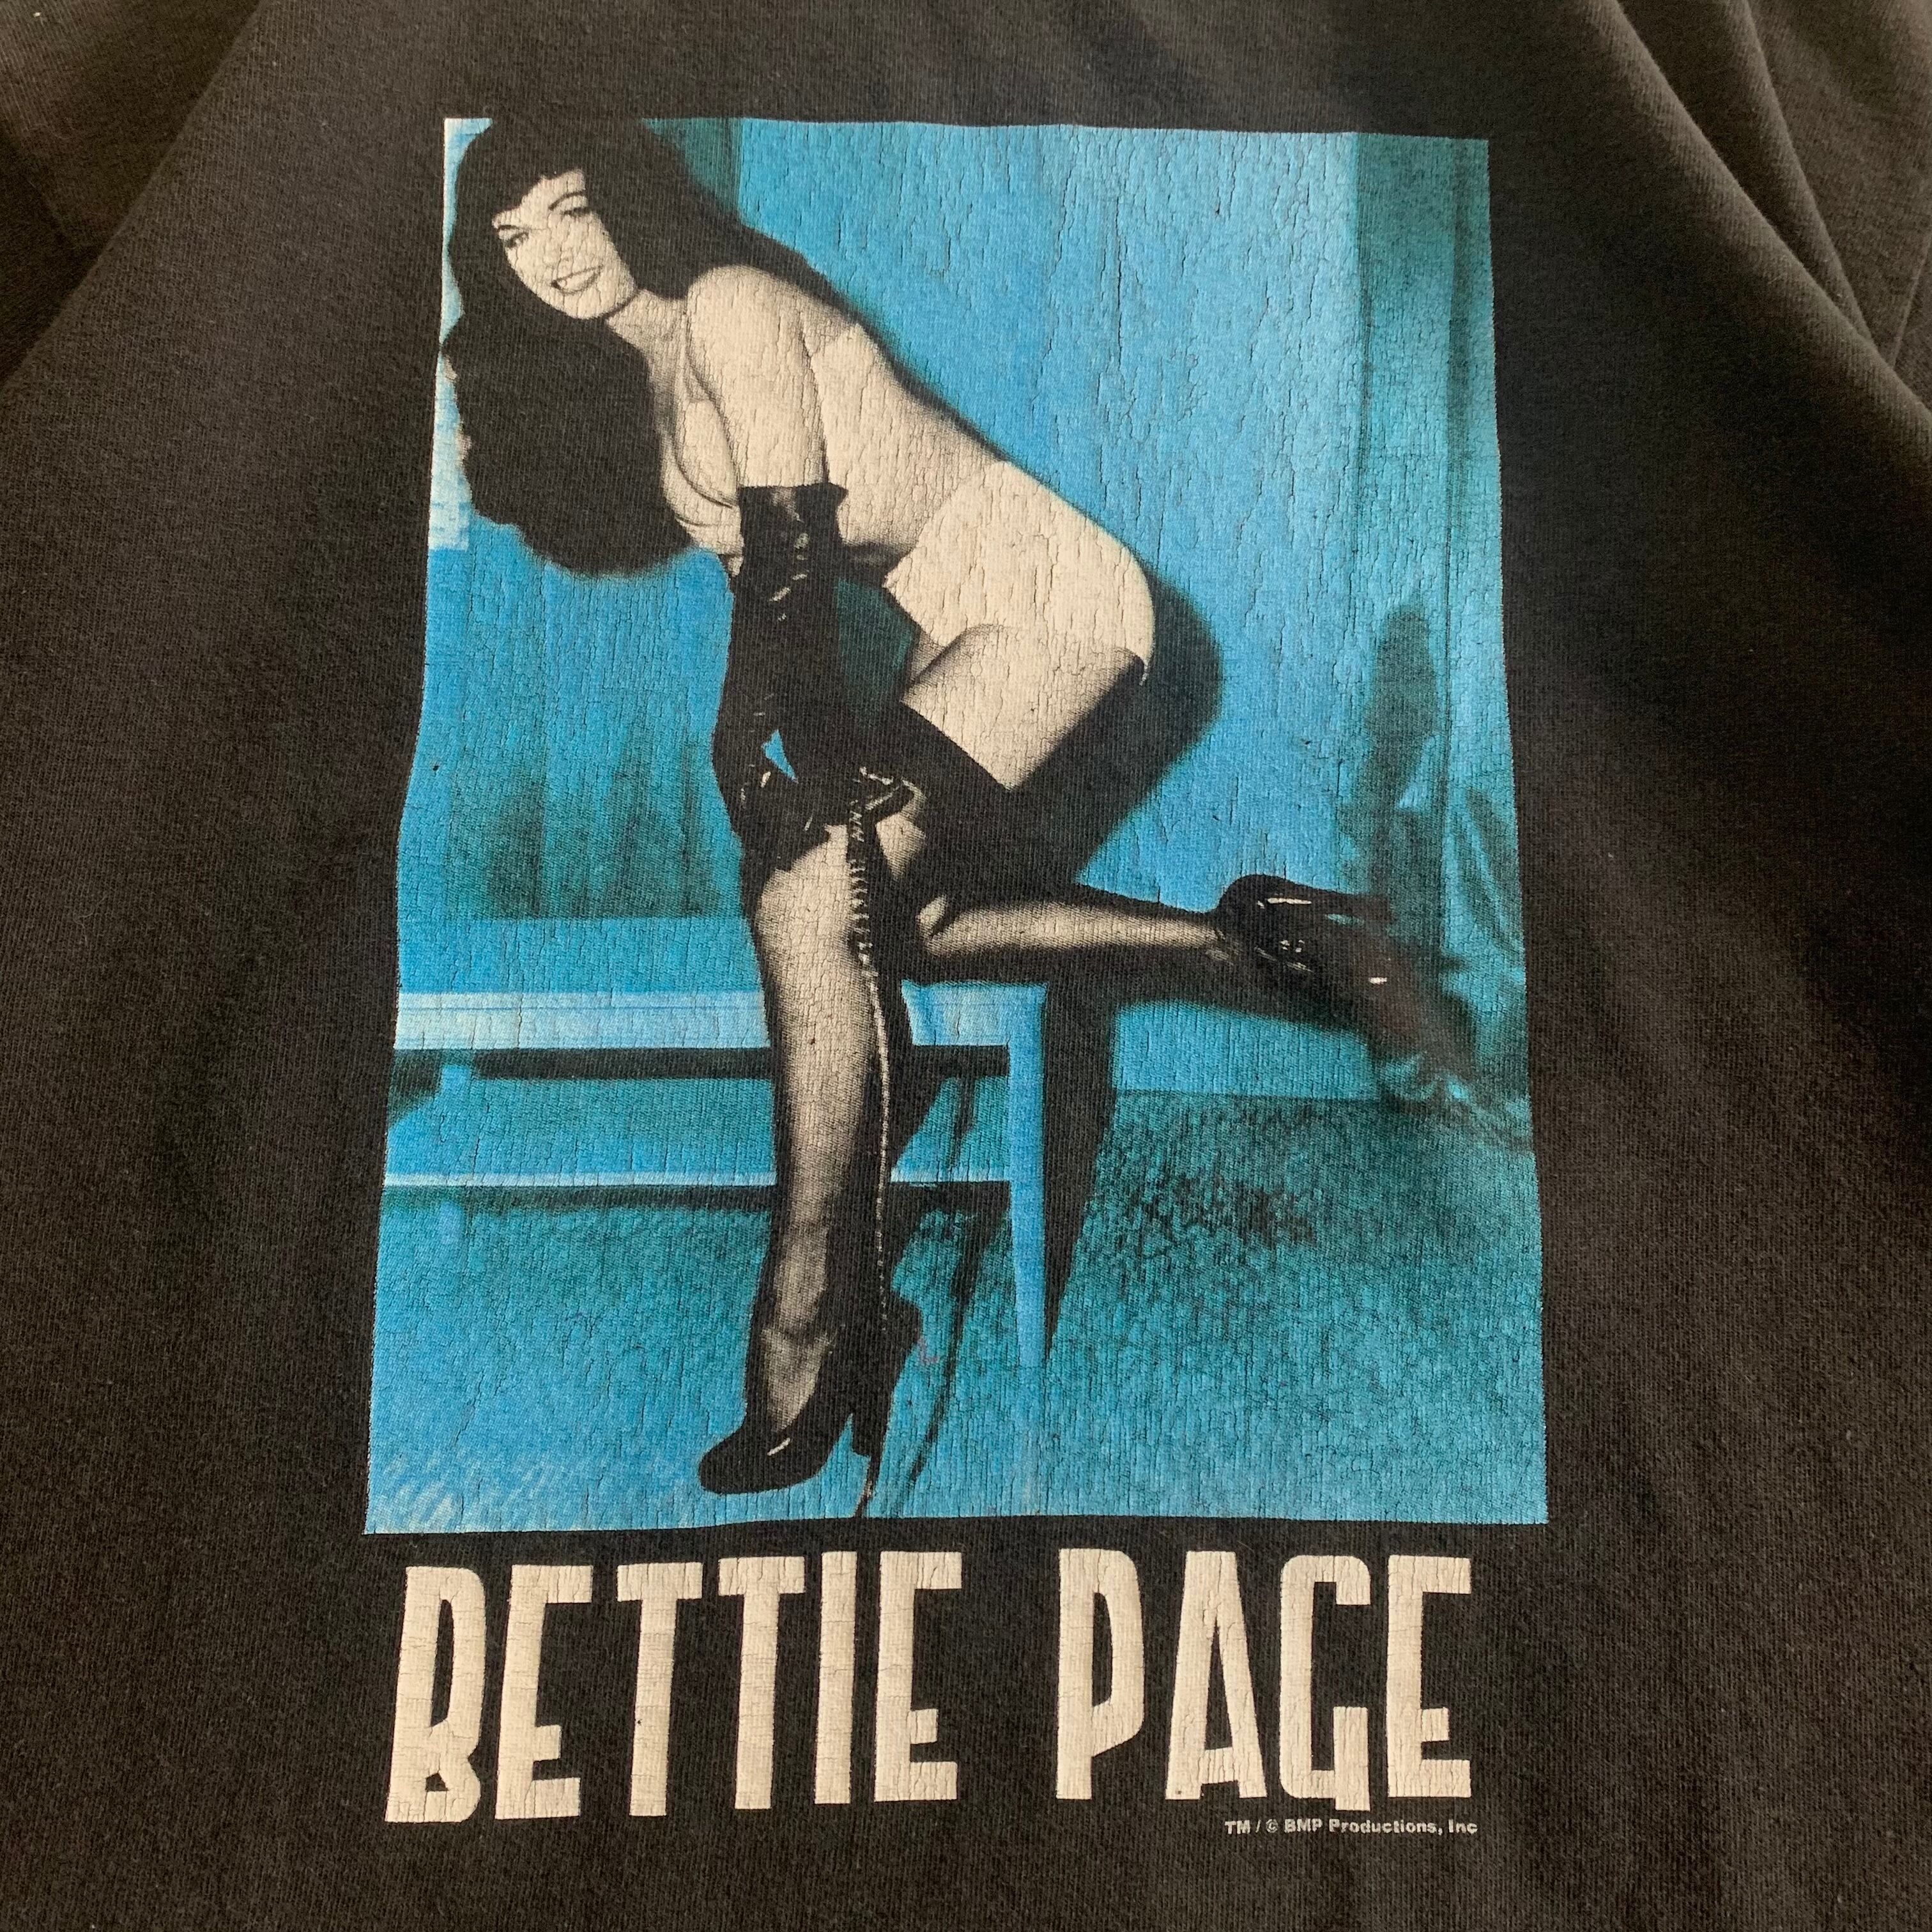 s Bettie Page T shirt   What'z up